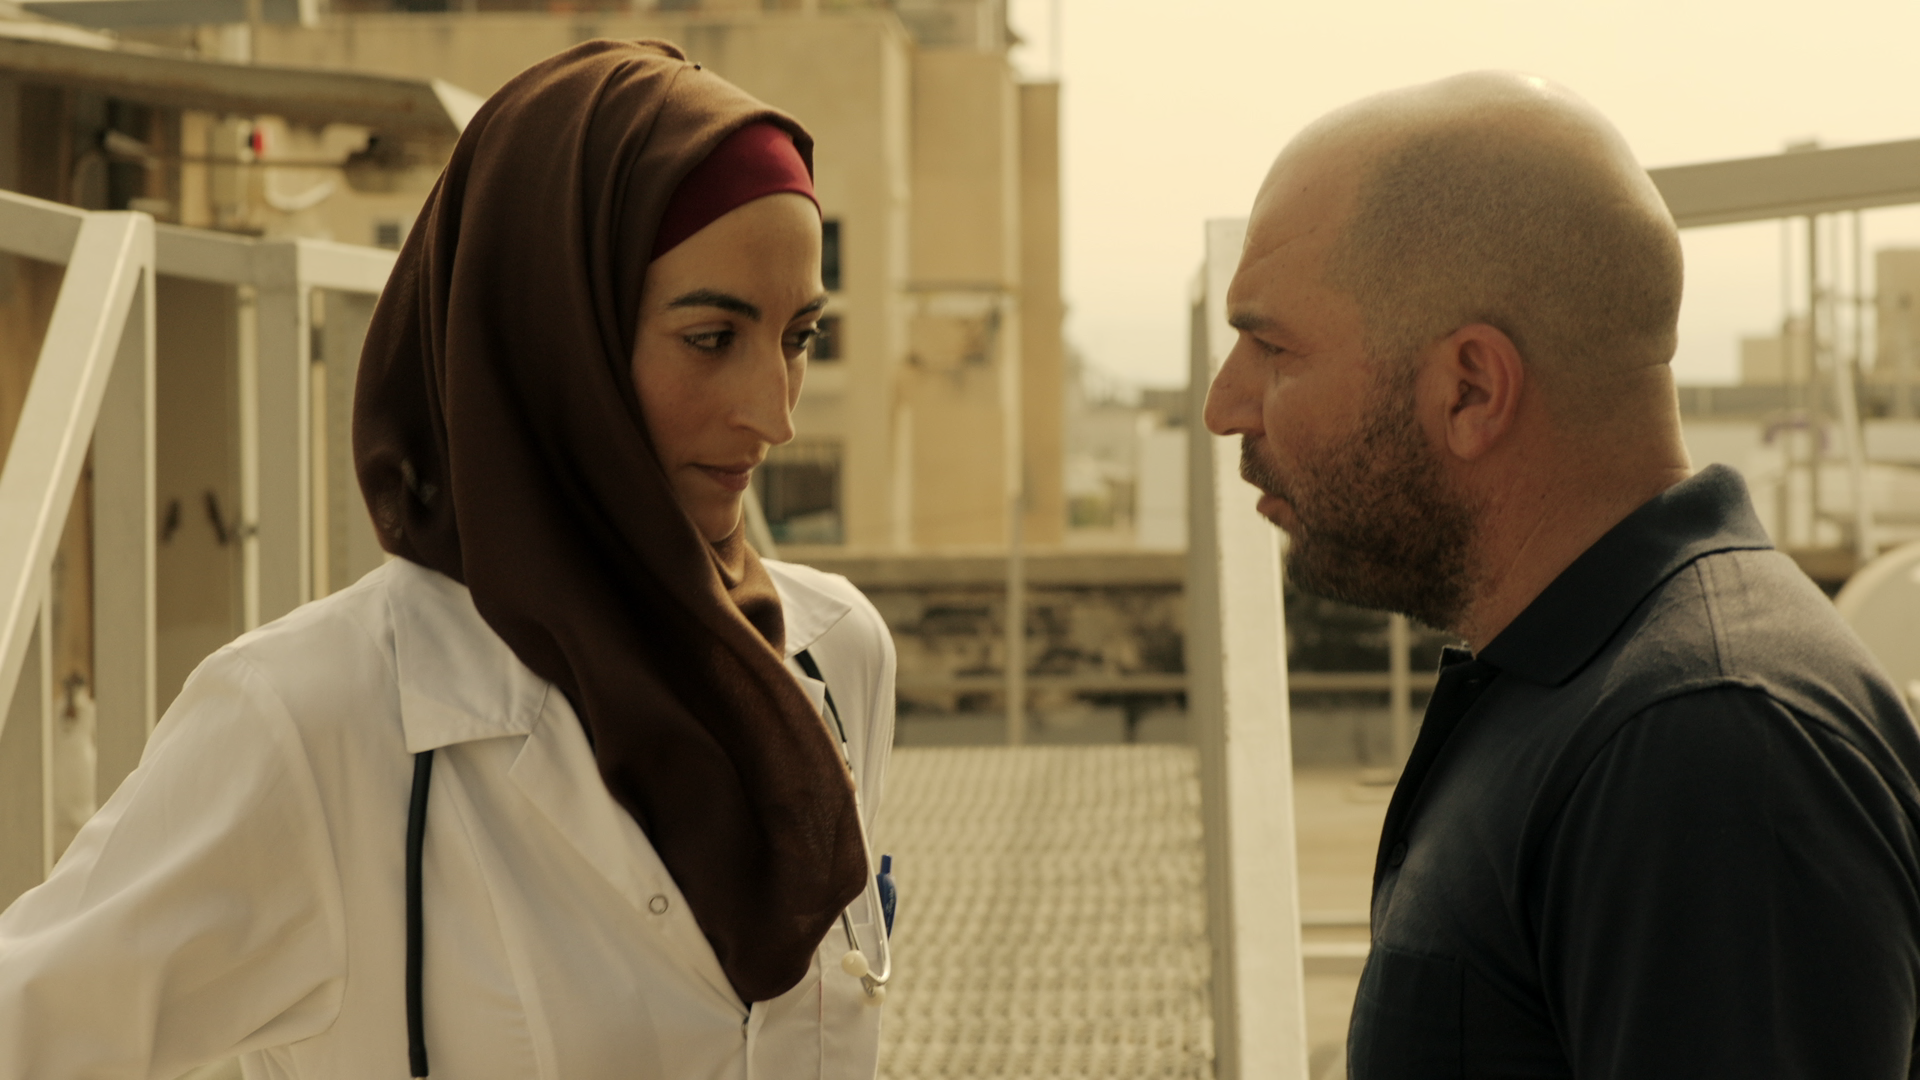 Fauda Screenwriter Wanted To Depict Terrorists As Real Human